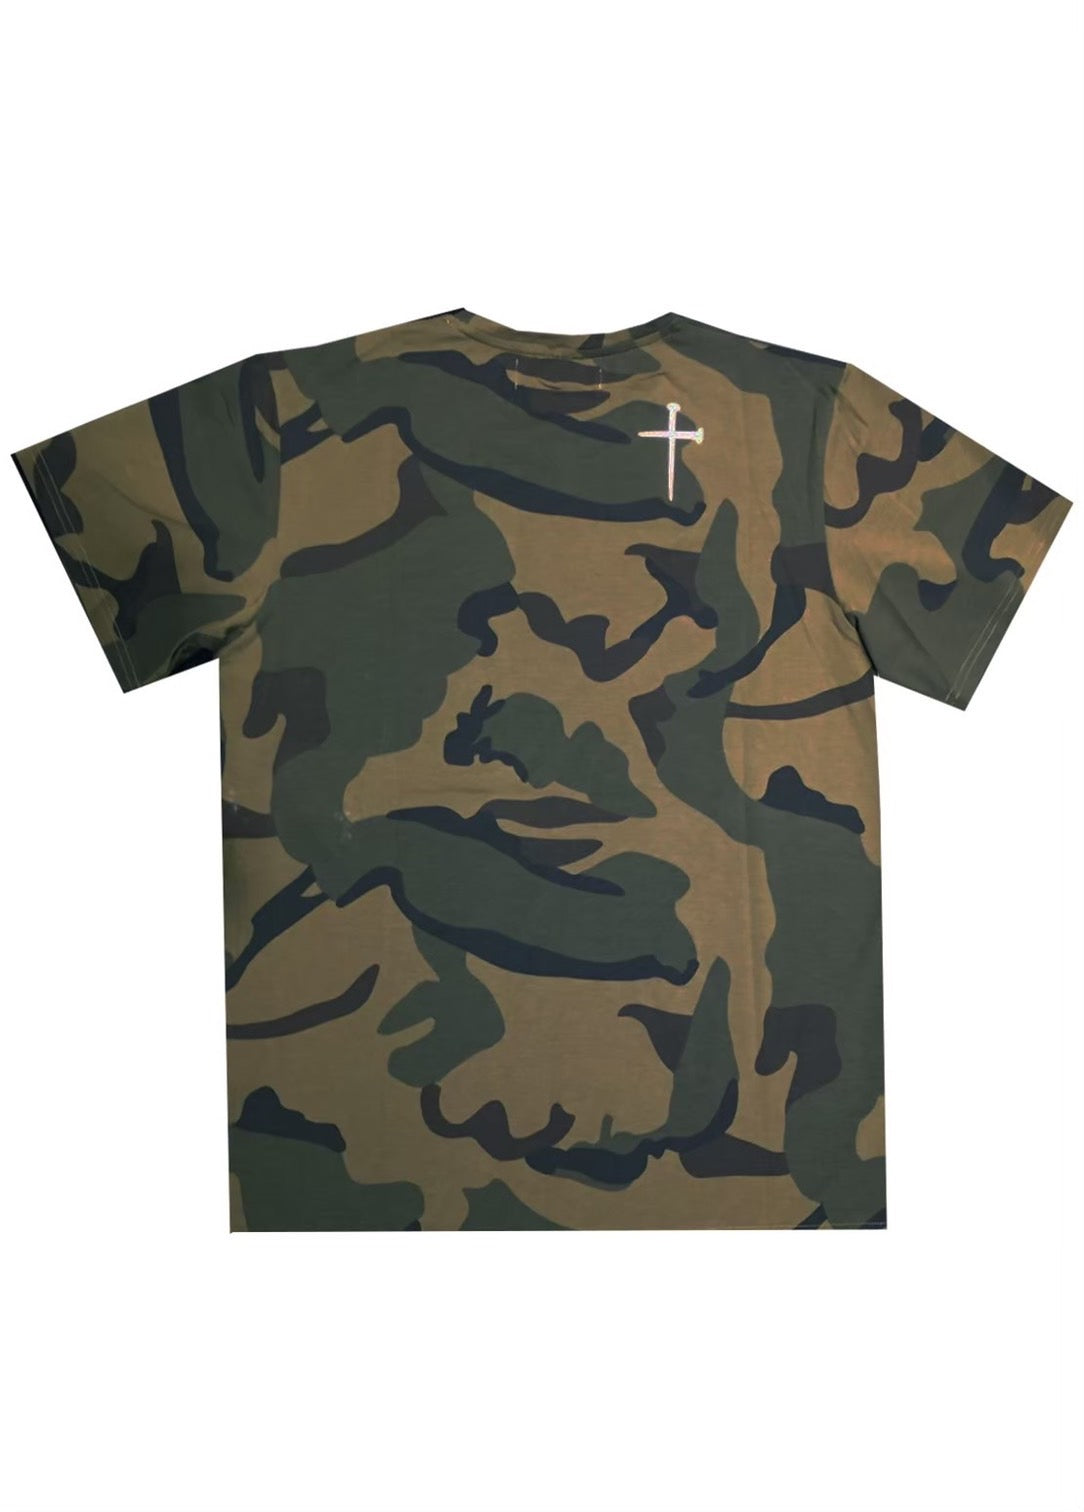 2018 CAMOUFL AGE TSHIRT 2018 camouflage top 